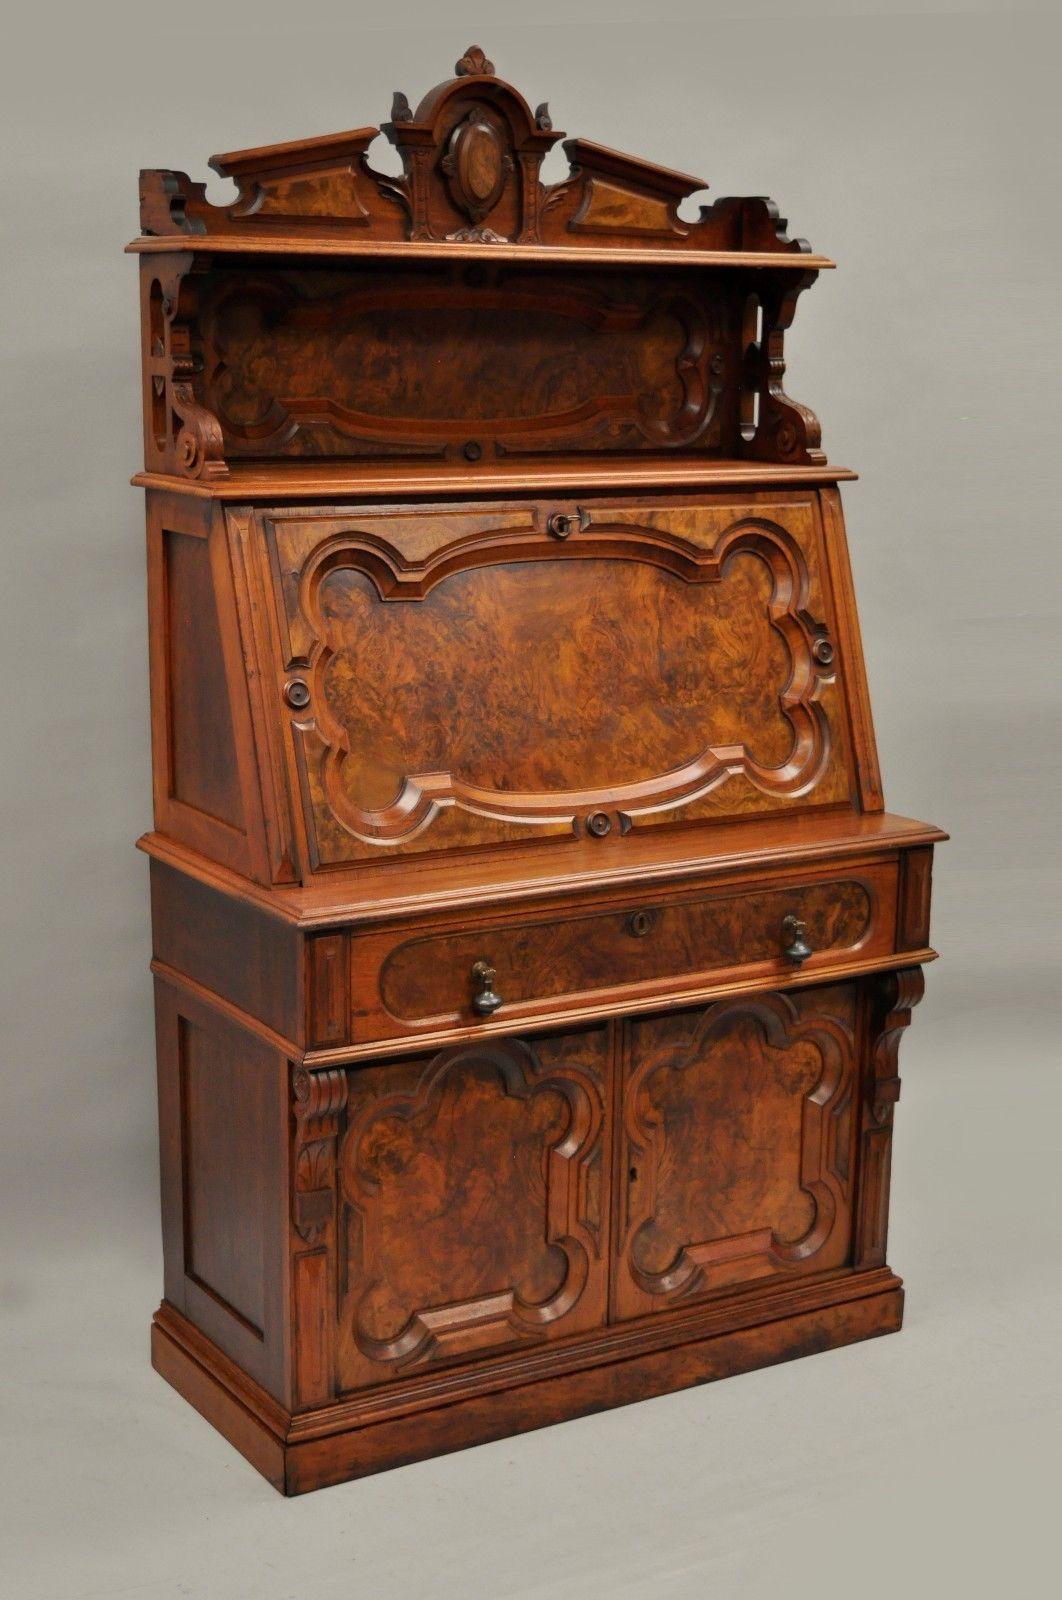 Antique Victorian/Renaissance Revival burl walnut drop front secretary desk. (Be sure to check item measurements as some items appear larger in photographs than in person). Item features solid two-piece wood construction, finely carved details,